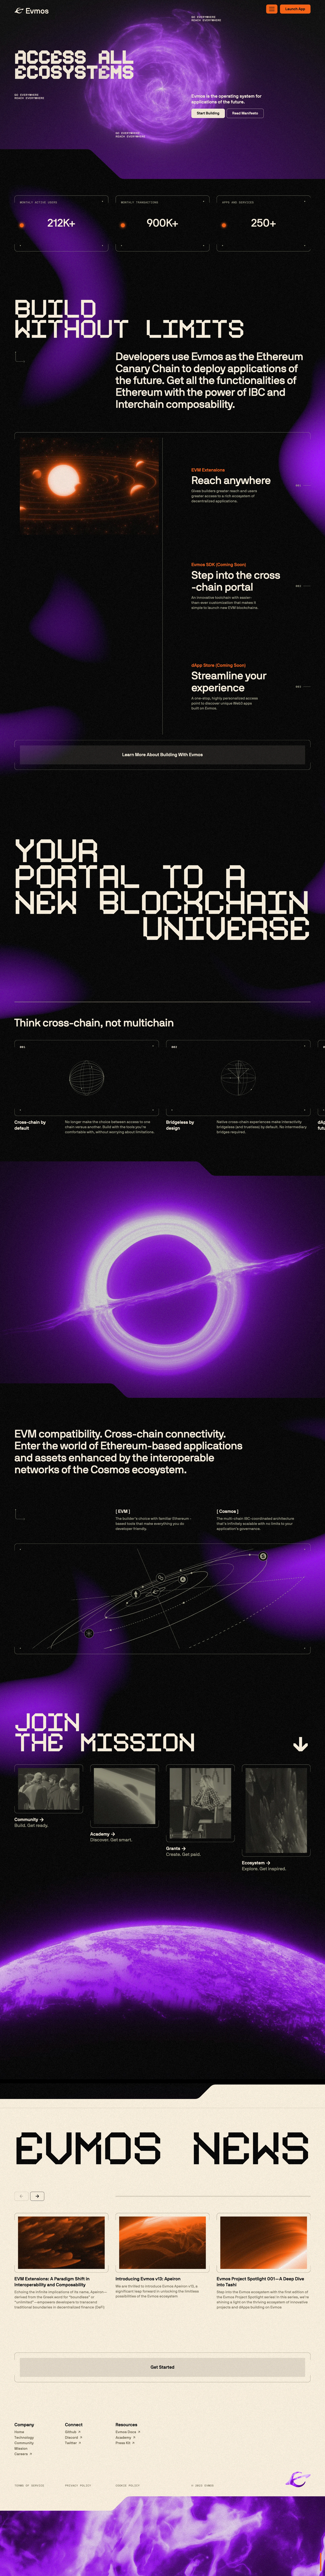 Evmos Landing Page Example: The operating system for cross-chain applications. Developing a world where the next million Web3 users are simply regular users.